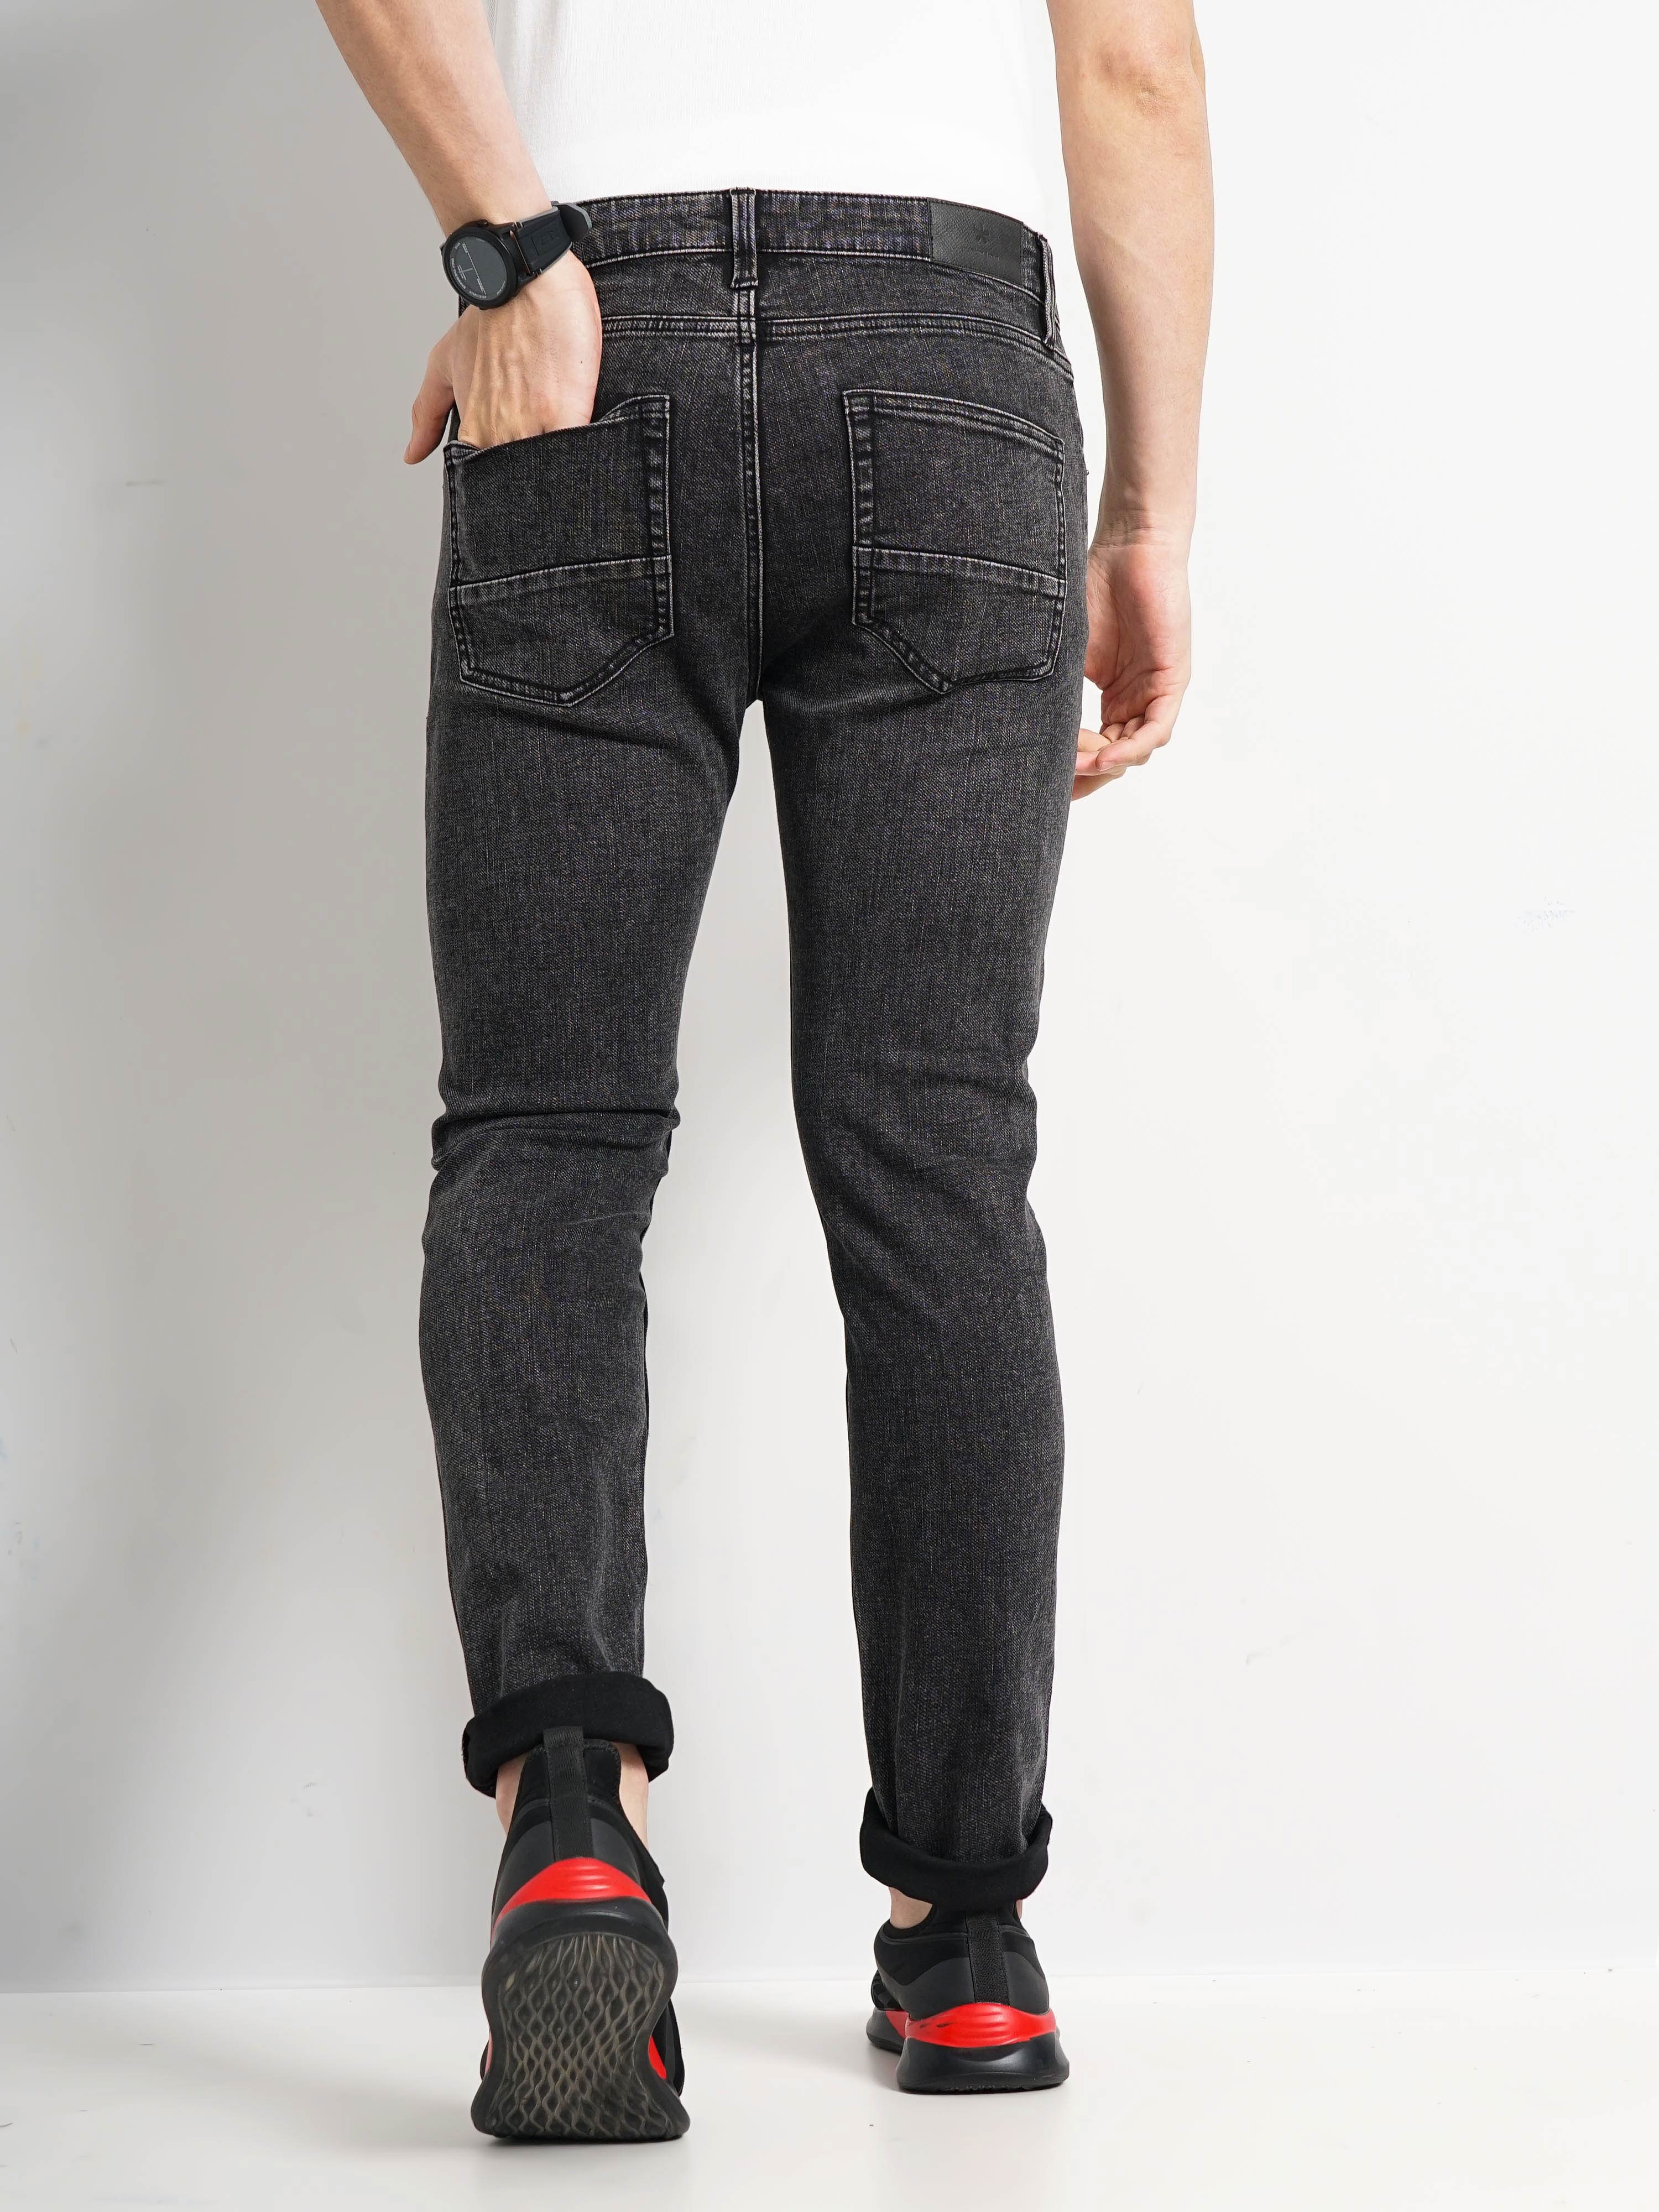 Buy Black Jeans for Men by MUFTI Online | Ajio.com